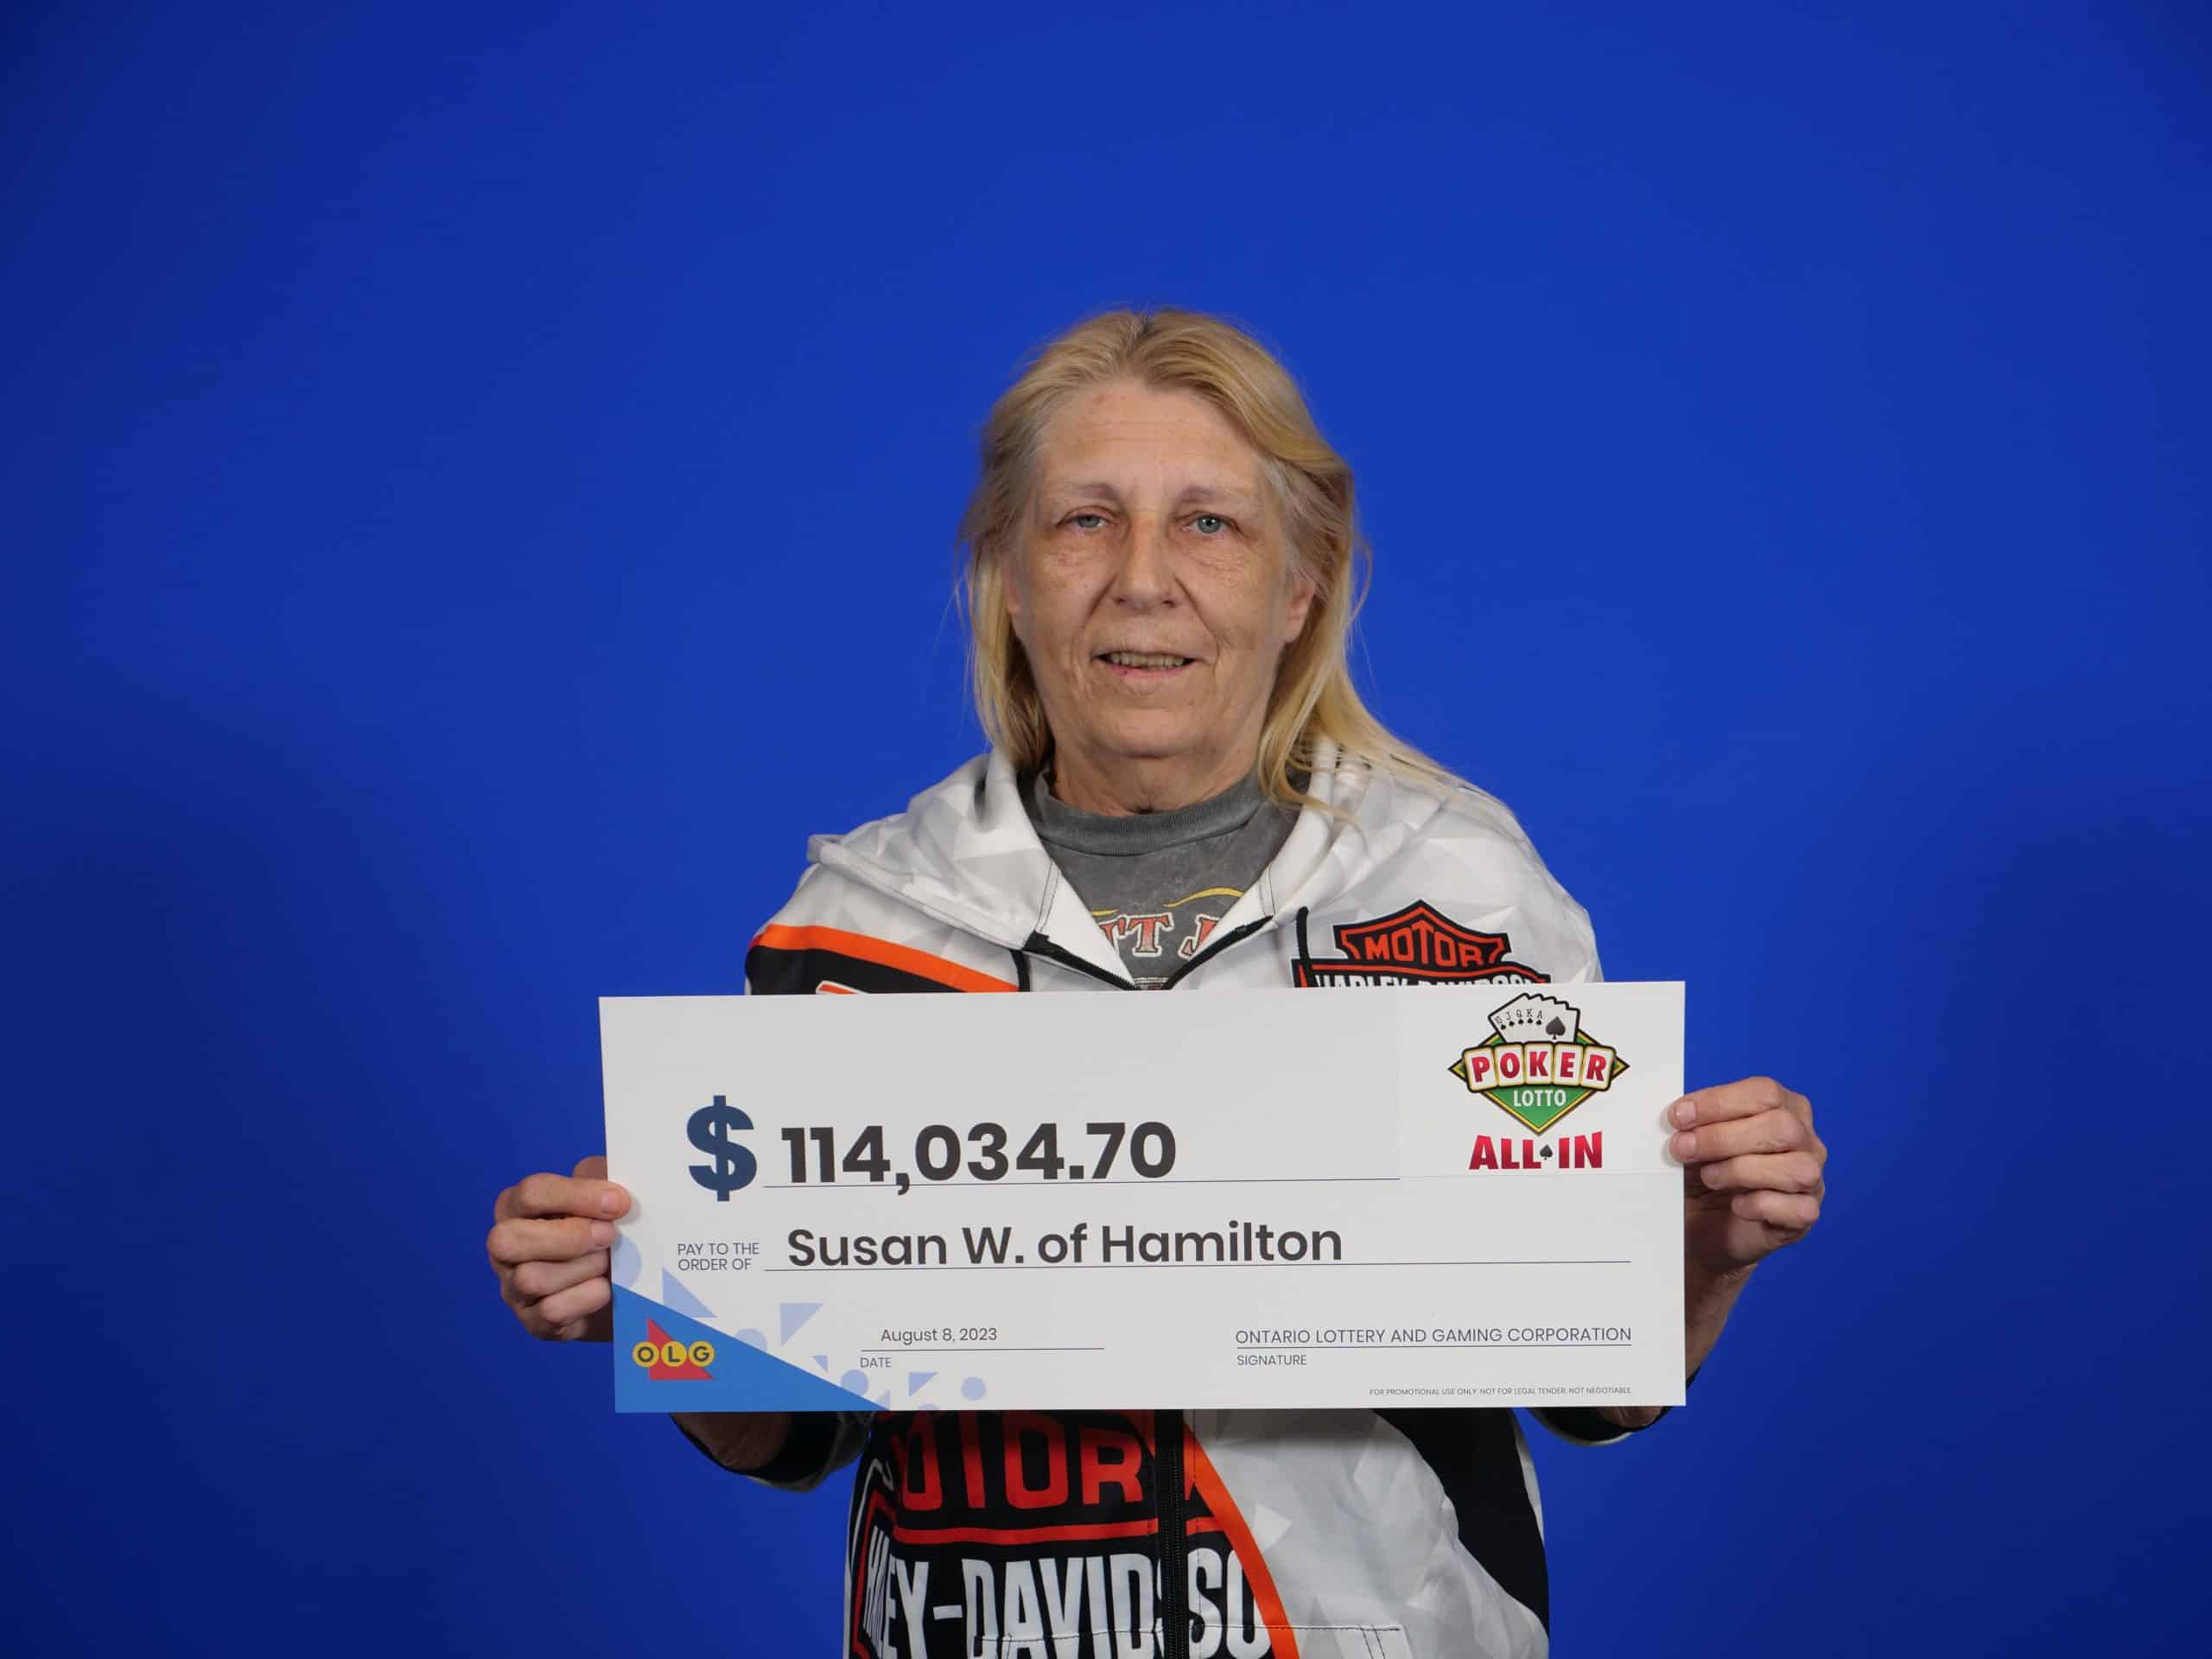 Susan Wasylenko of Hamilton won a total of $114,034.70 from the Poker Lotto All In jackpot. COURTESY OLG